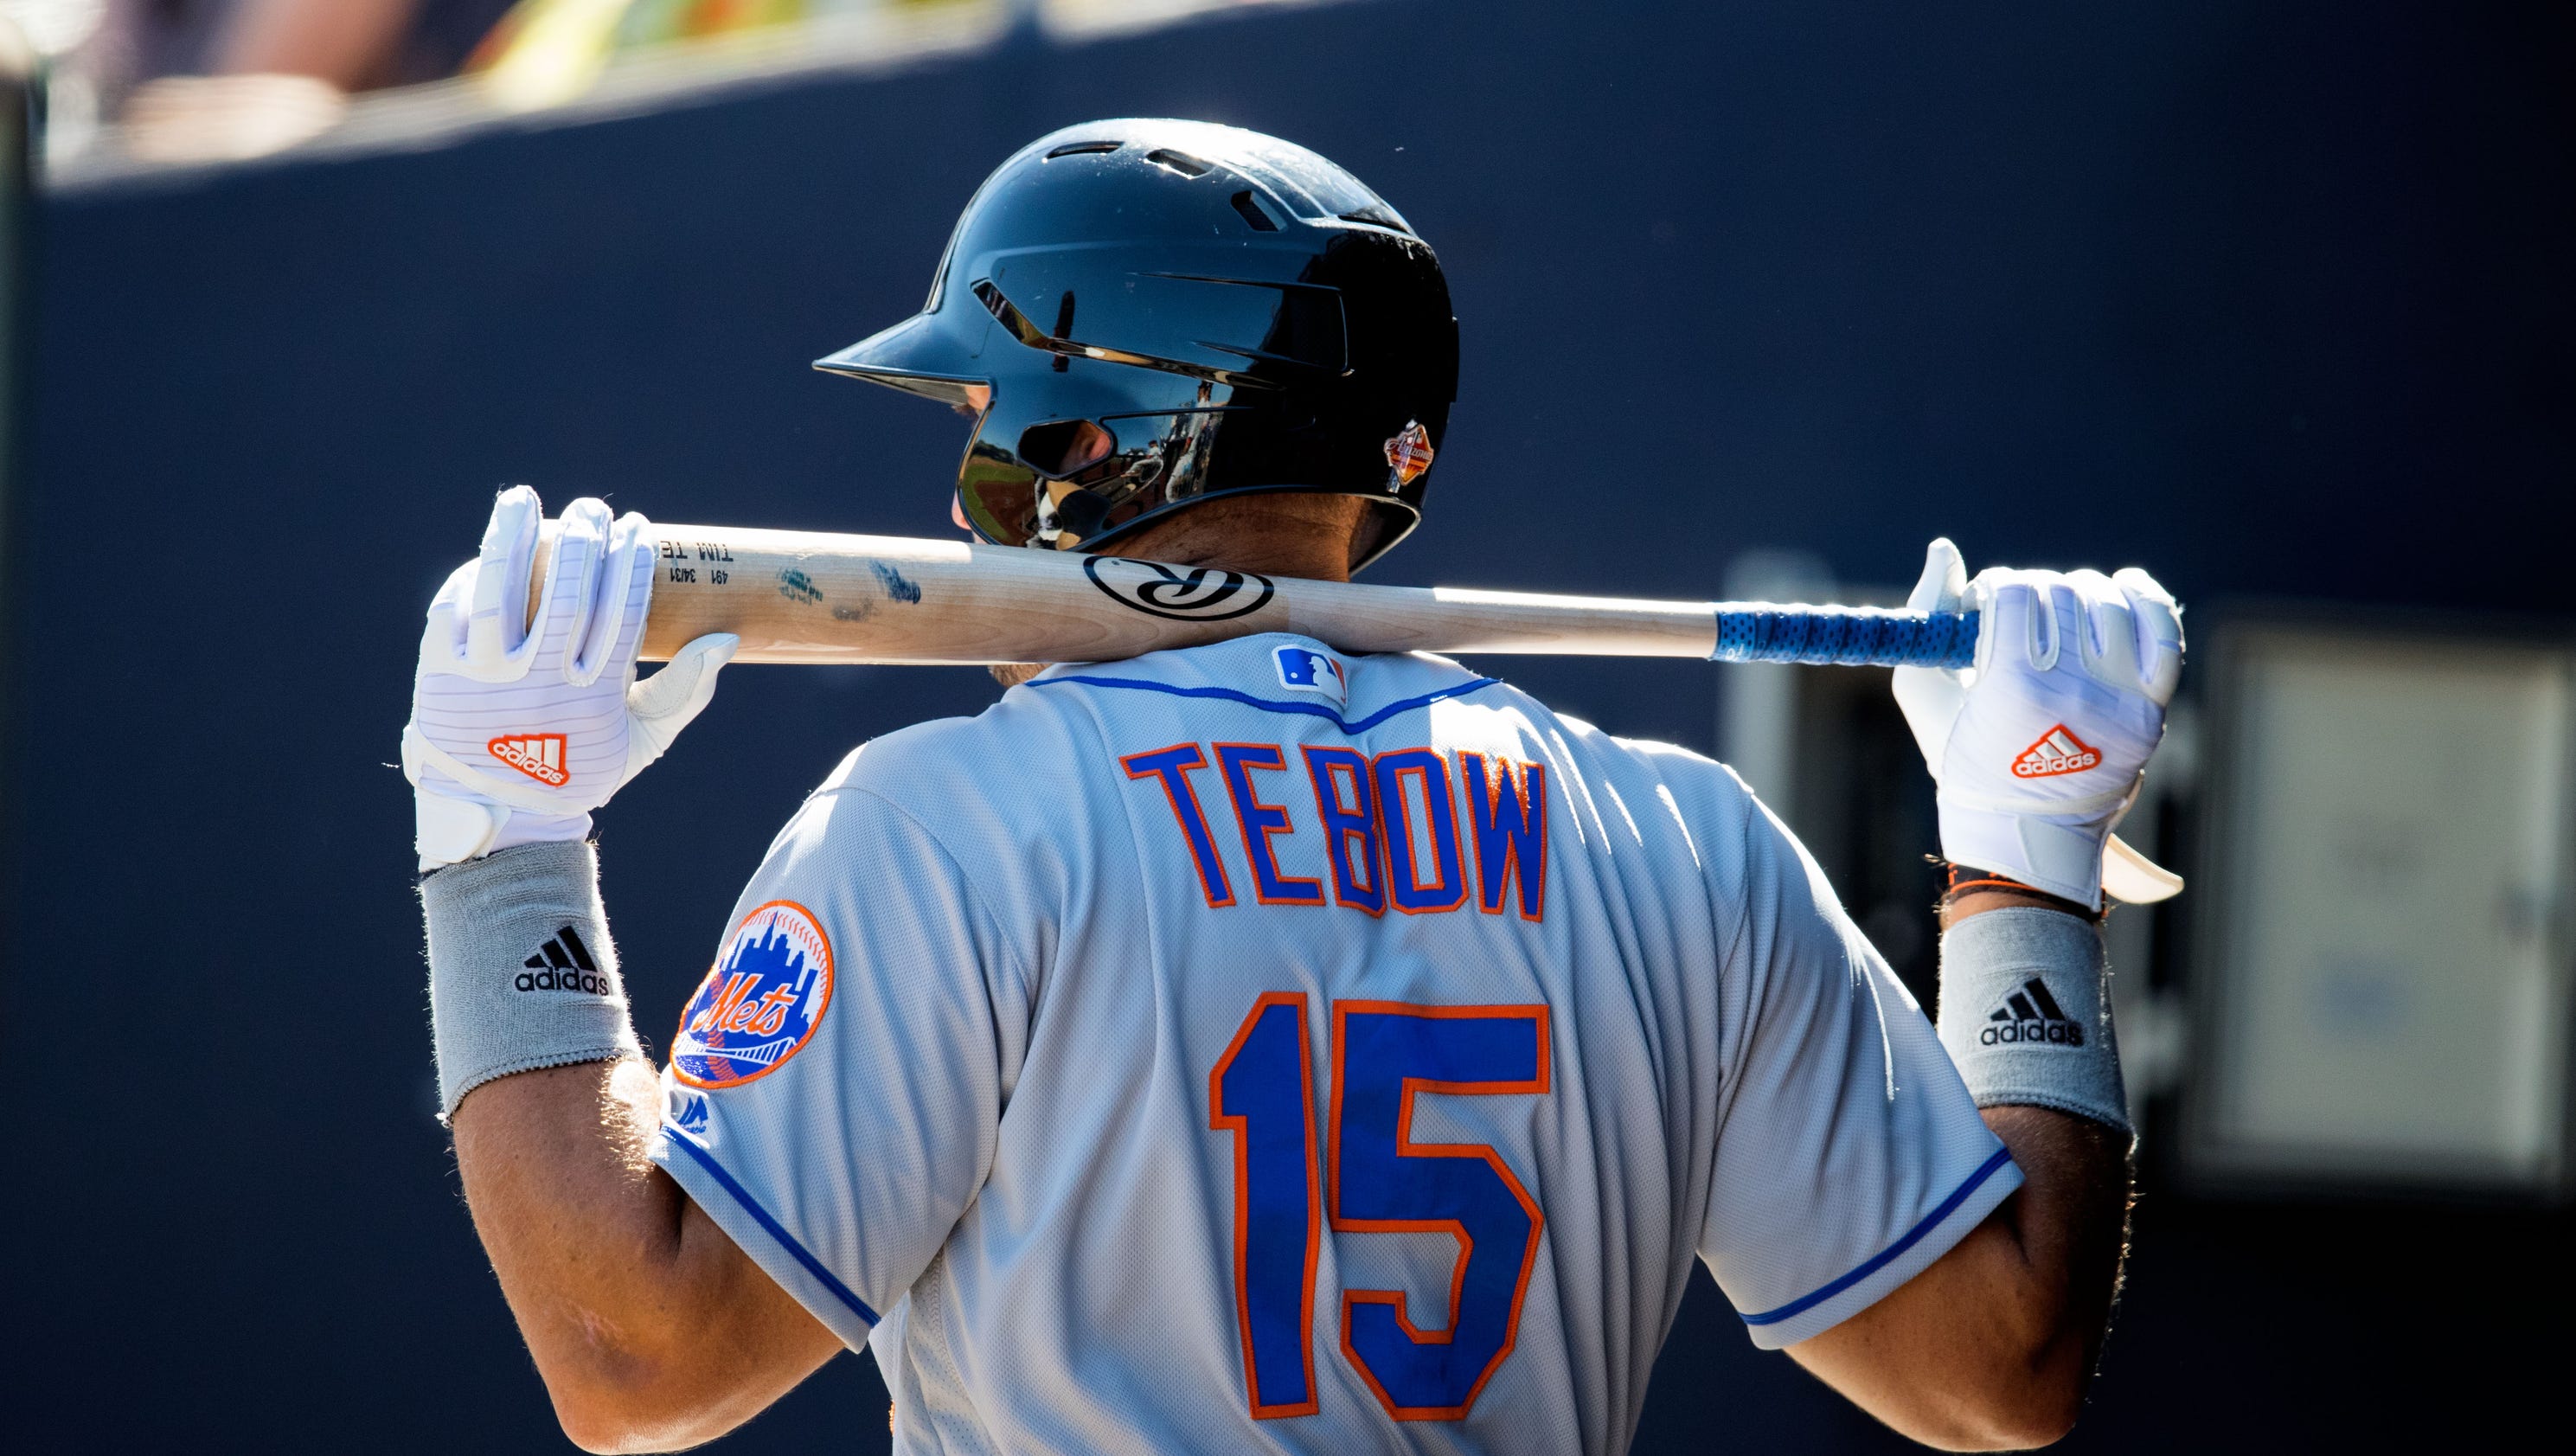 Tim Tebow launches baseball career with Mets3200 x 1680